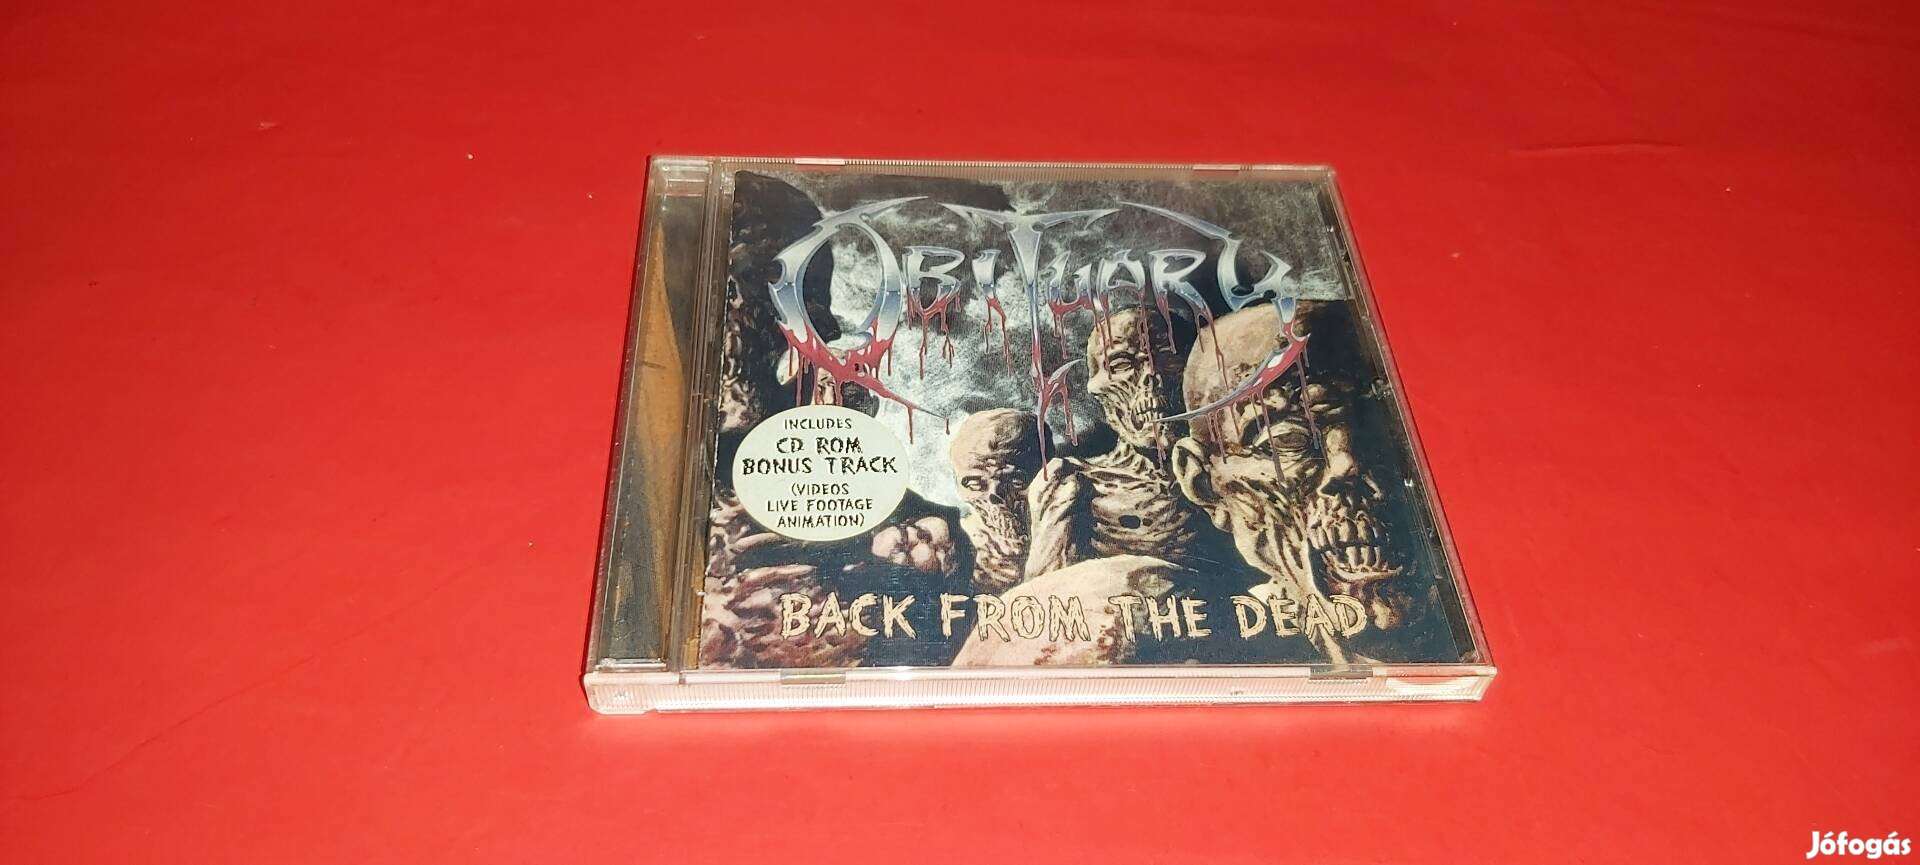 Obituary Back from dead Cd 1997